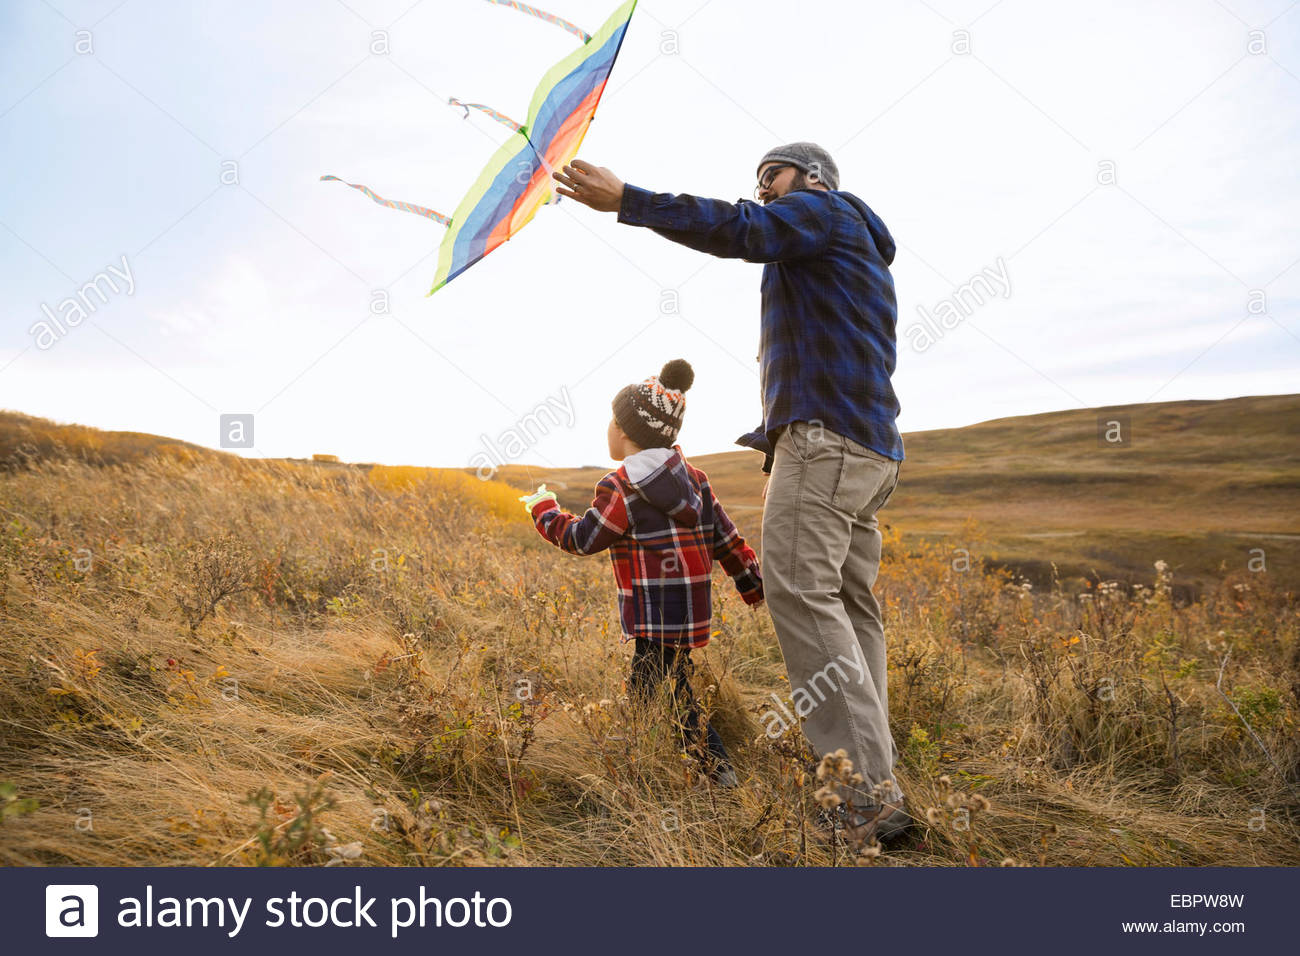 Father and son with kite walking in field Stock Photo